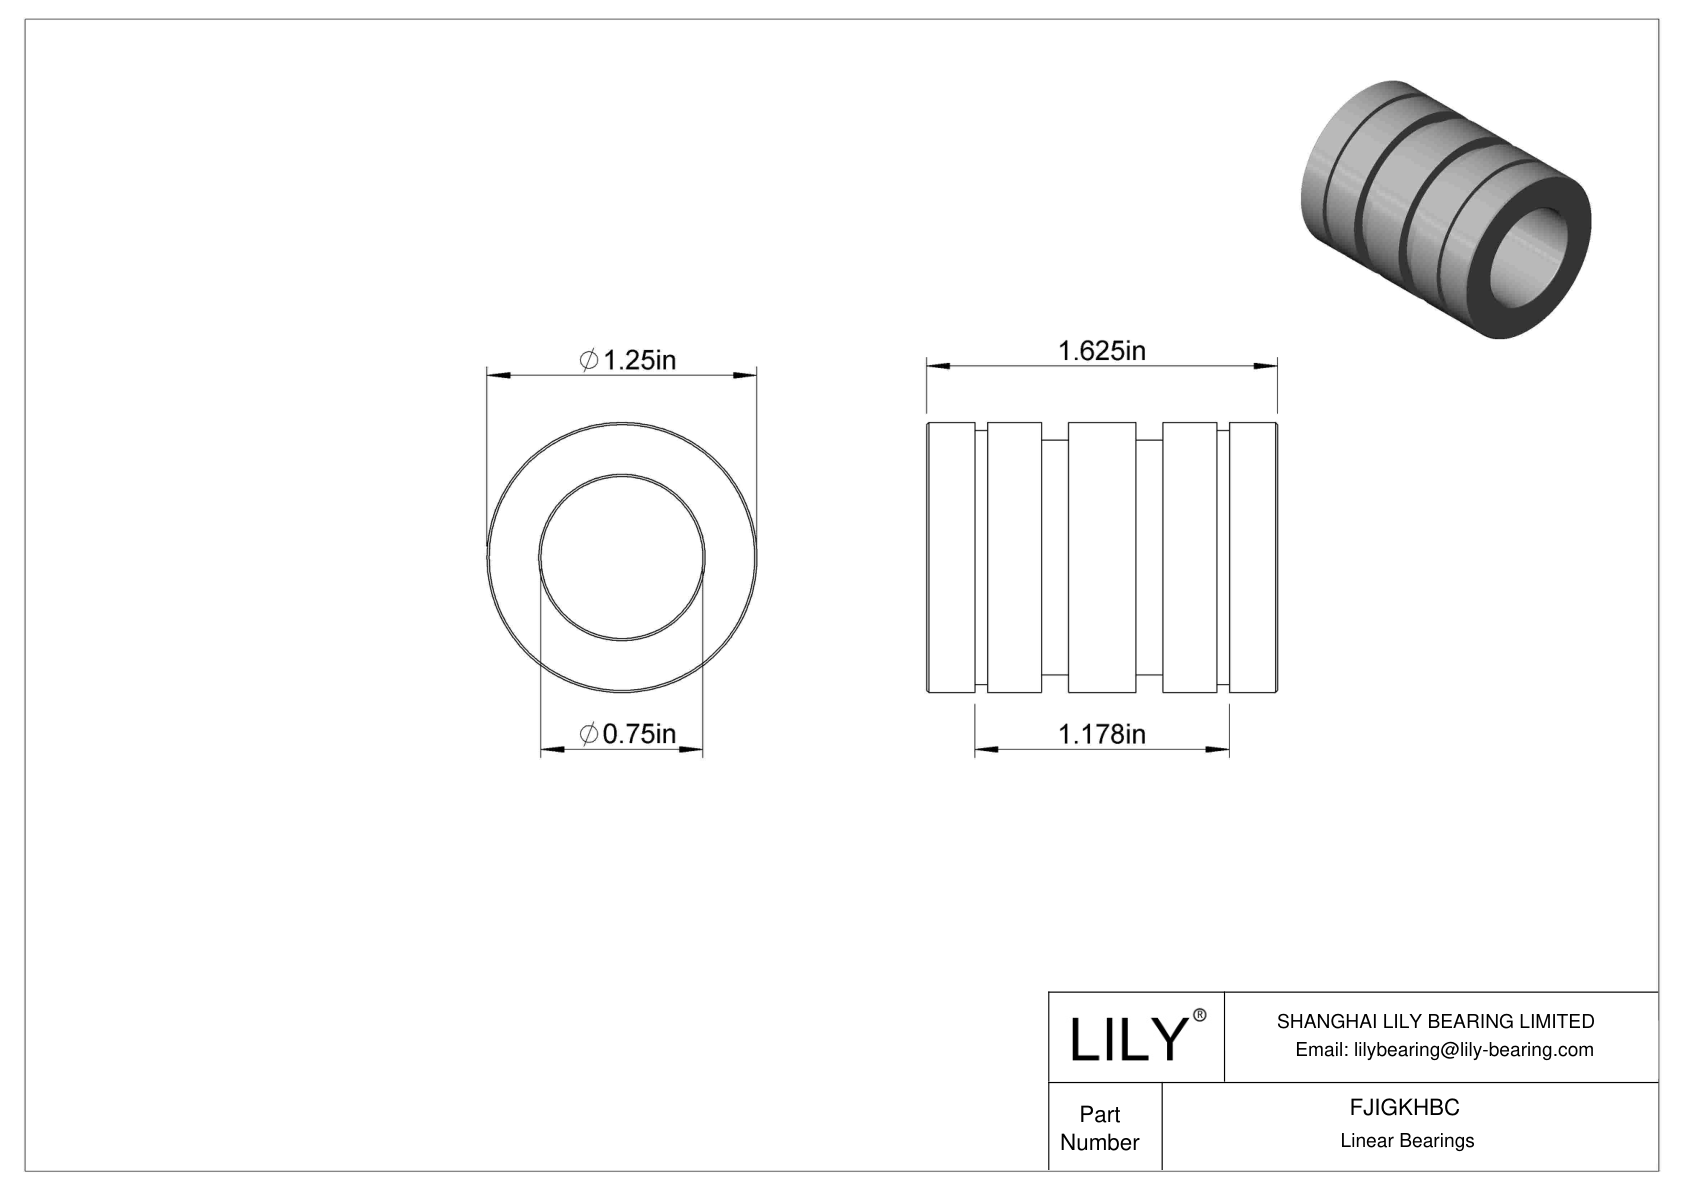 FJIGKHBC Common Linear Sleeve Bearings cad drawing